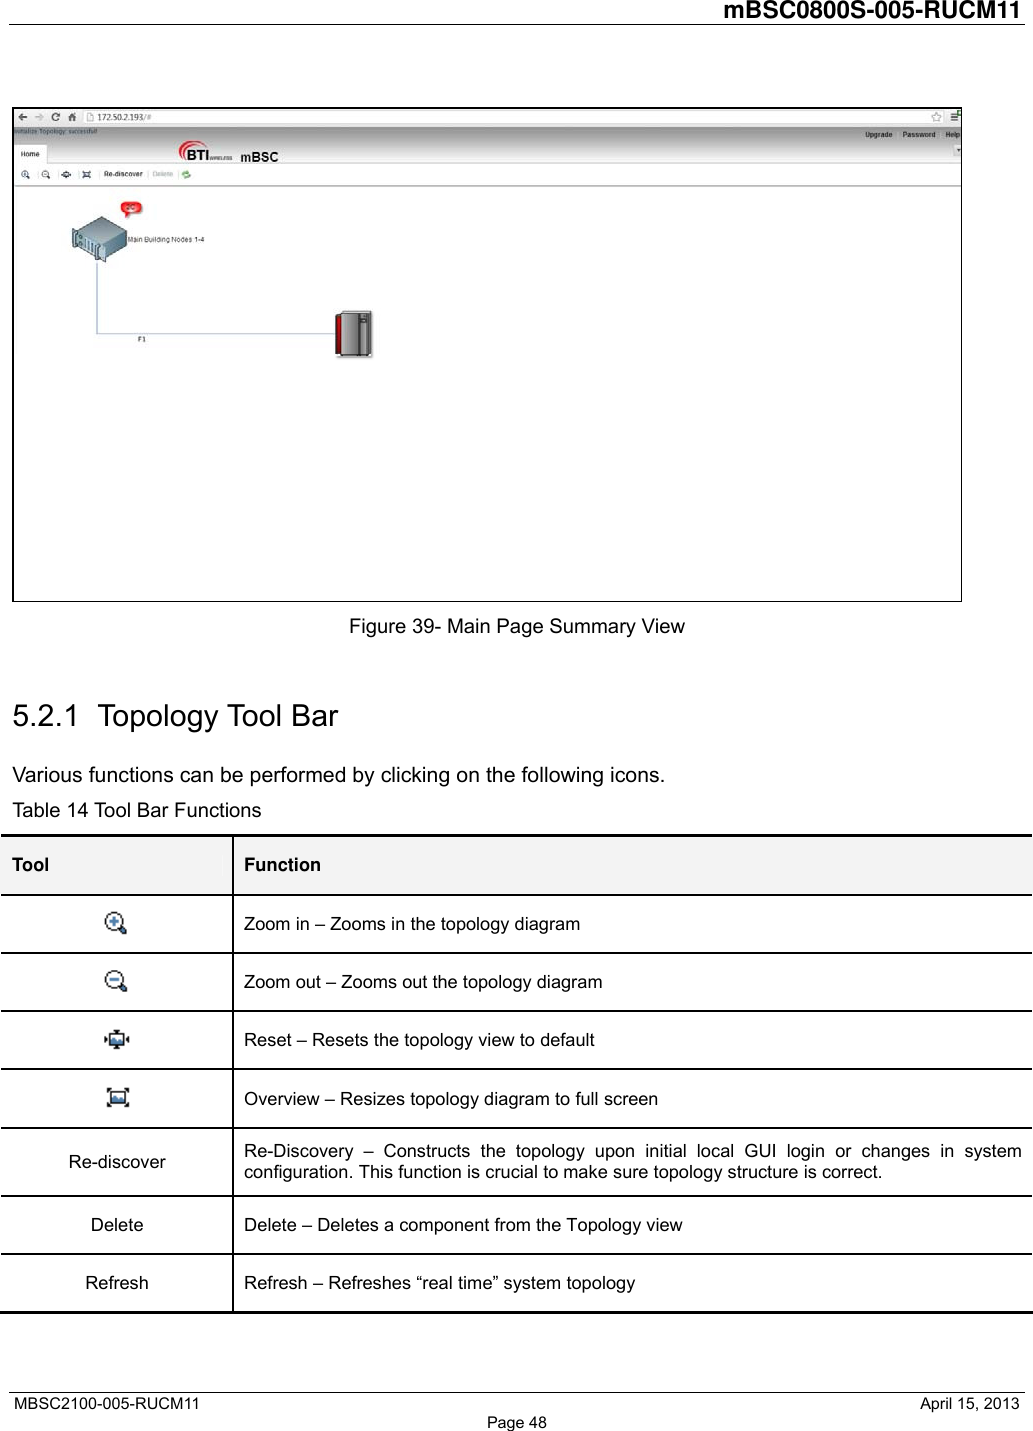         mBSC0800S-005-RUCM11   MBSC2100-005-RUCM11                                              April 15, 2013 Page 48  Figure 39- Main Page Summary View  5.2.1 Topology Tool Bar Various functions can be performed by clicking on the following icons. Table 14 Tool Bar Functions Tool  Function  Zoom in – Zooms in the topology diagram  Zoom out – Zooms out the topology diagram  Reset – Resets the topology view to default  Overview – Resizes topology diagram to full screen   Re-discover  Re-Discovery – Constructs the topology upon initial local GUI login or changes in system configuration. This function is crucial to make sure topology structure is correct. Delete  Delete – Deletes a component from the Topology view Refresh  Refresh – Refreshes “real time” system topology  